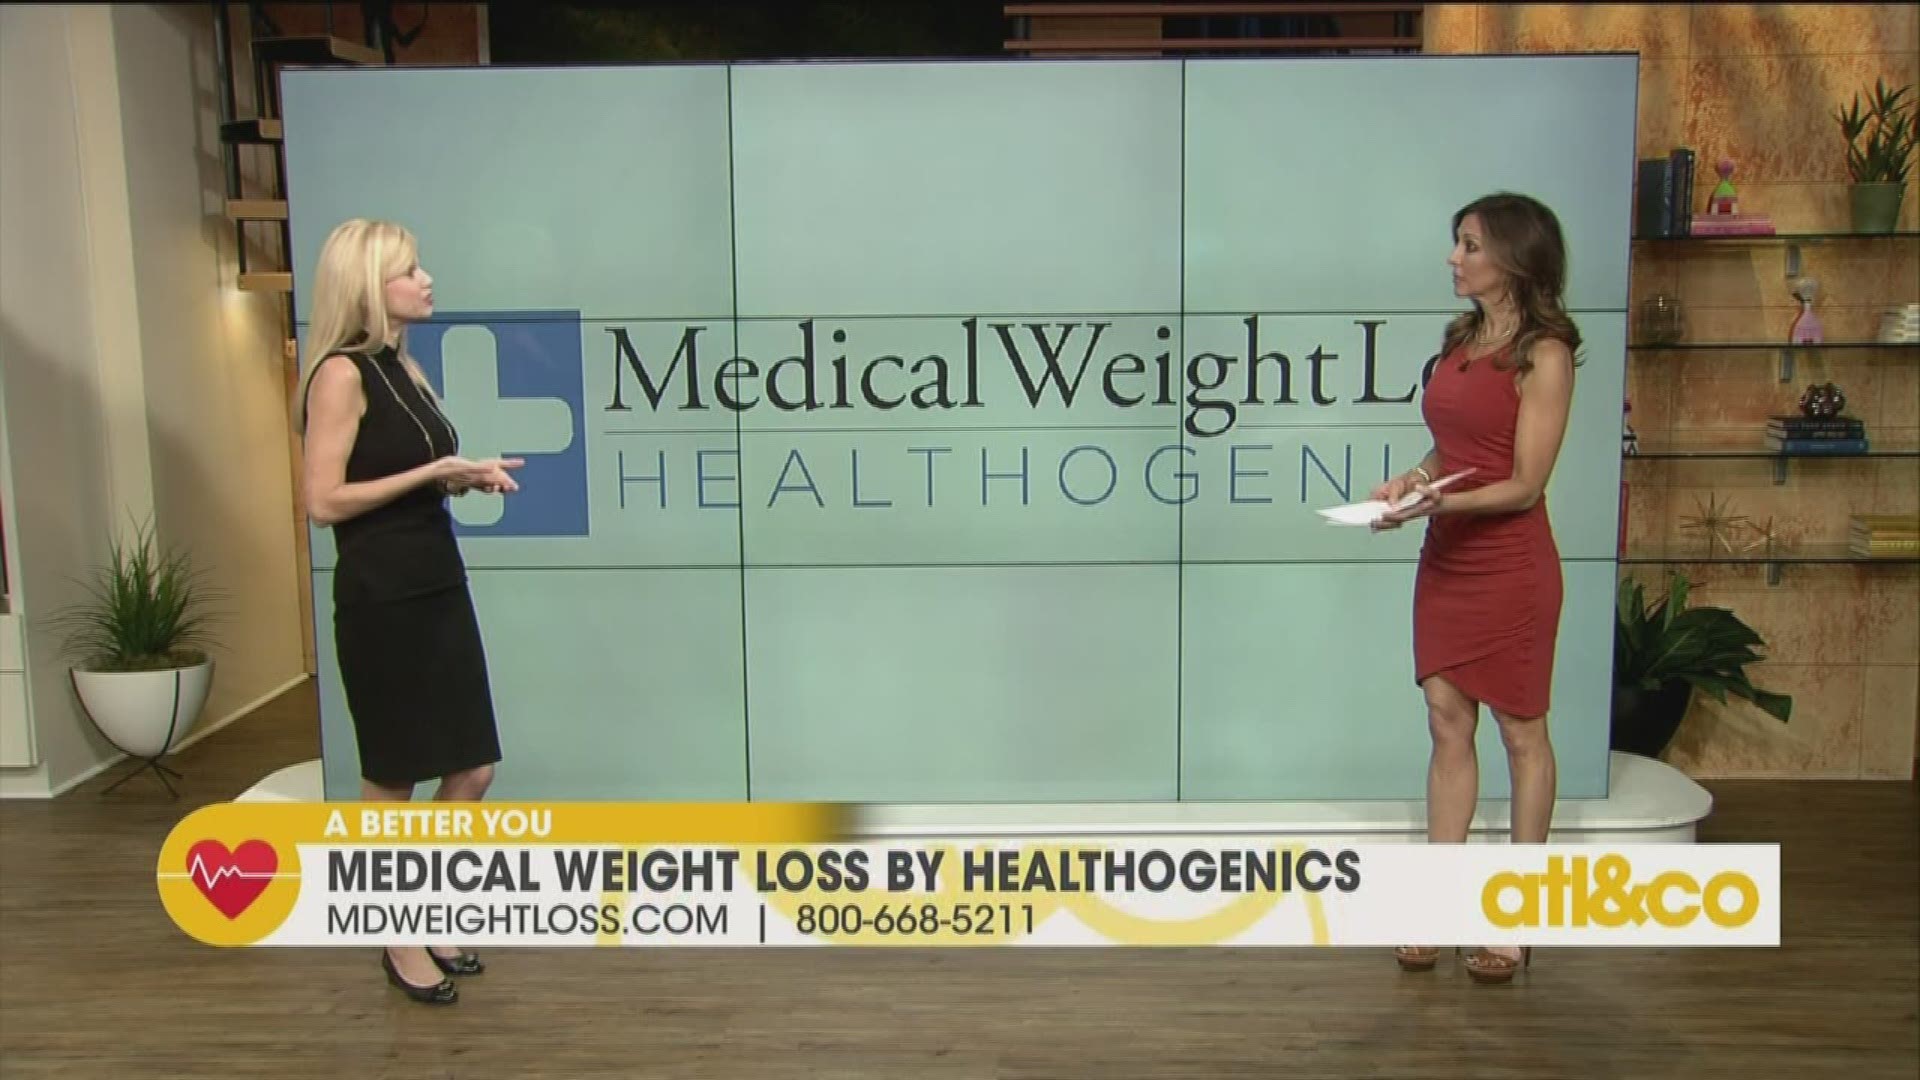 Get an exclusive offer from Medical Weight Loss by Healthogenics